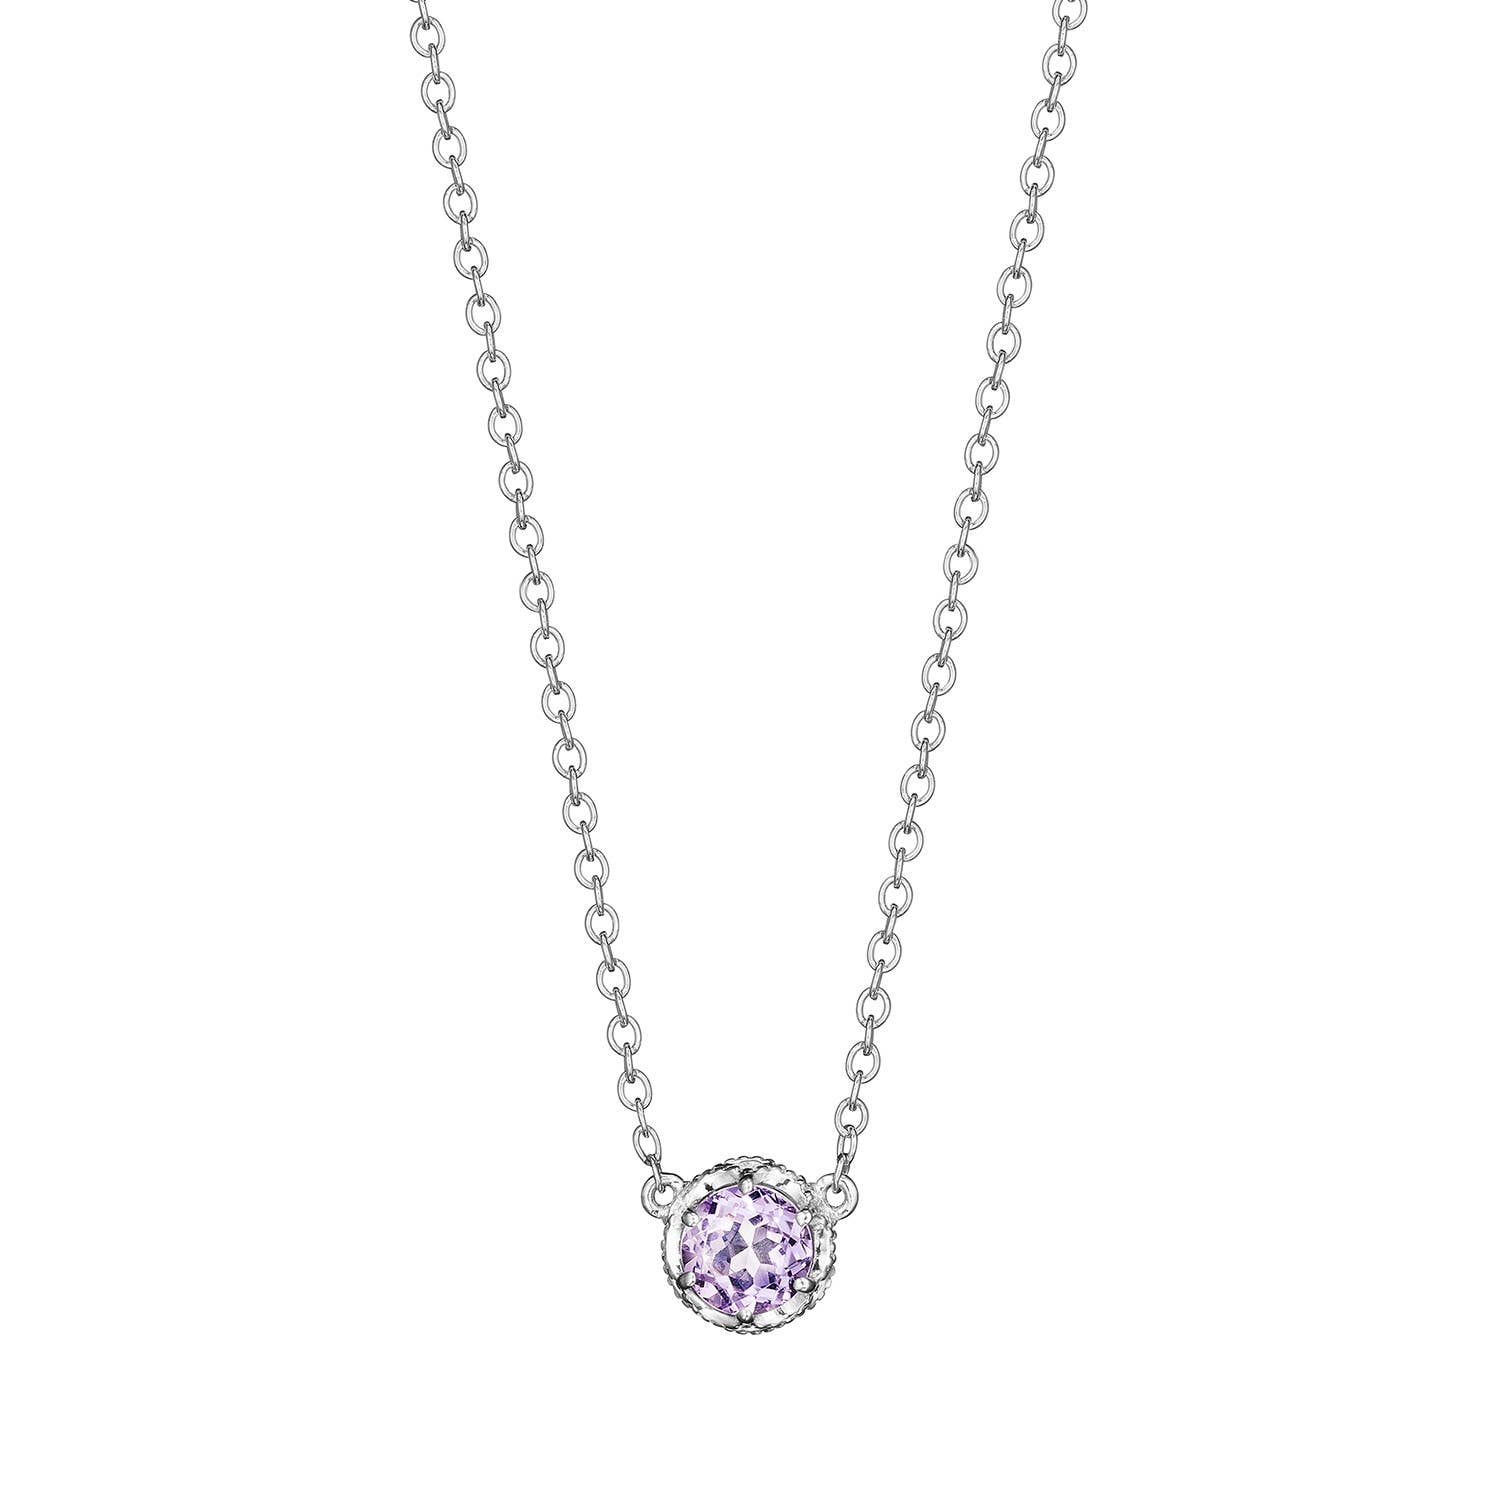 Petite Crescent Crown Gem Necklace featuring Rose Amethyst